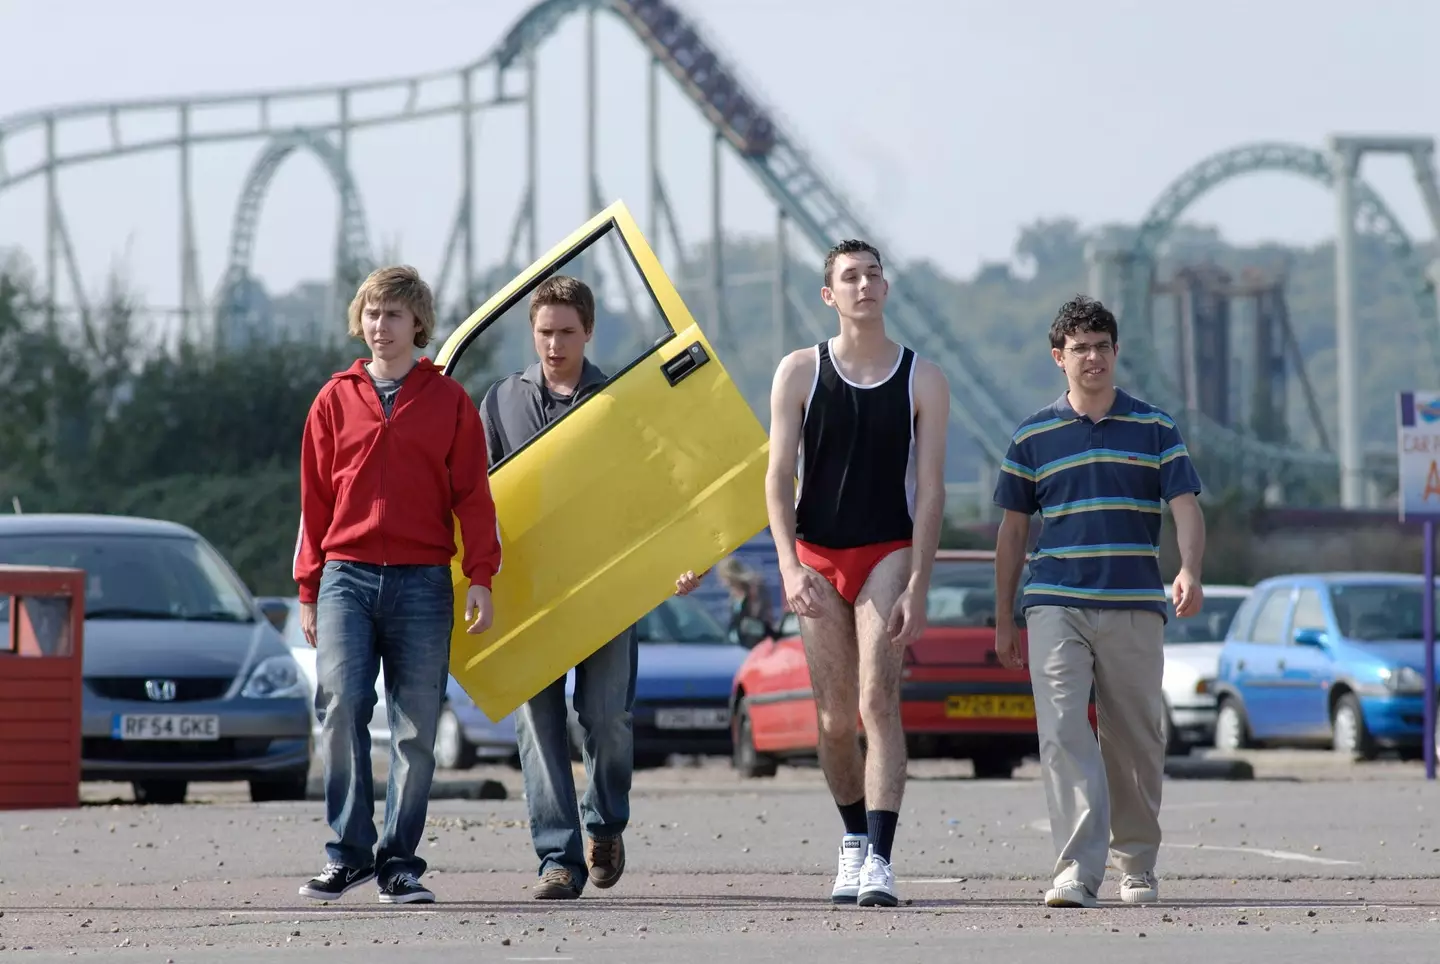 Finding a fresh clip from The Inbetweeners is a rare treat.